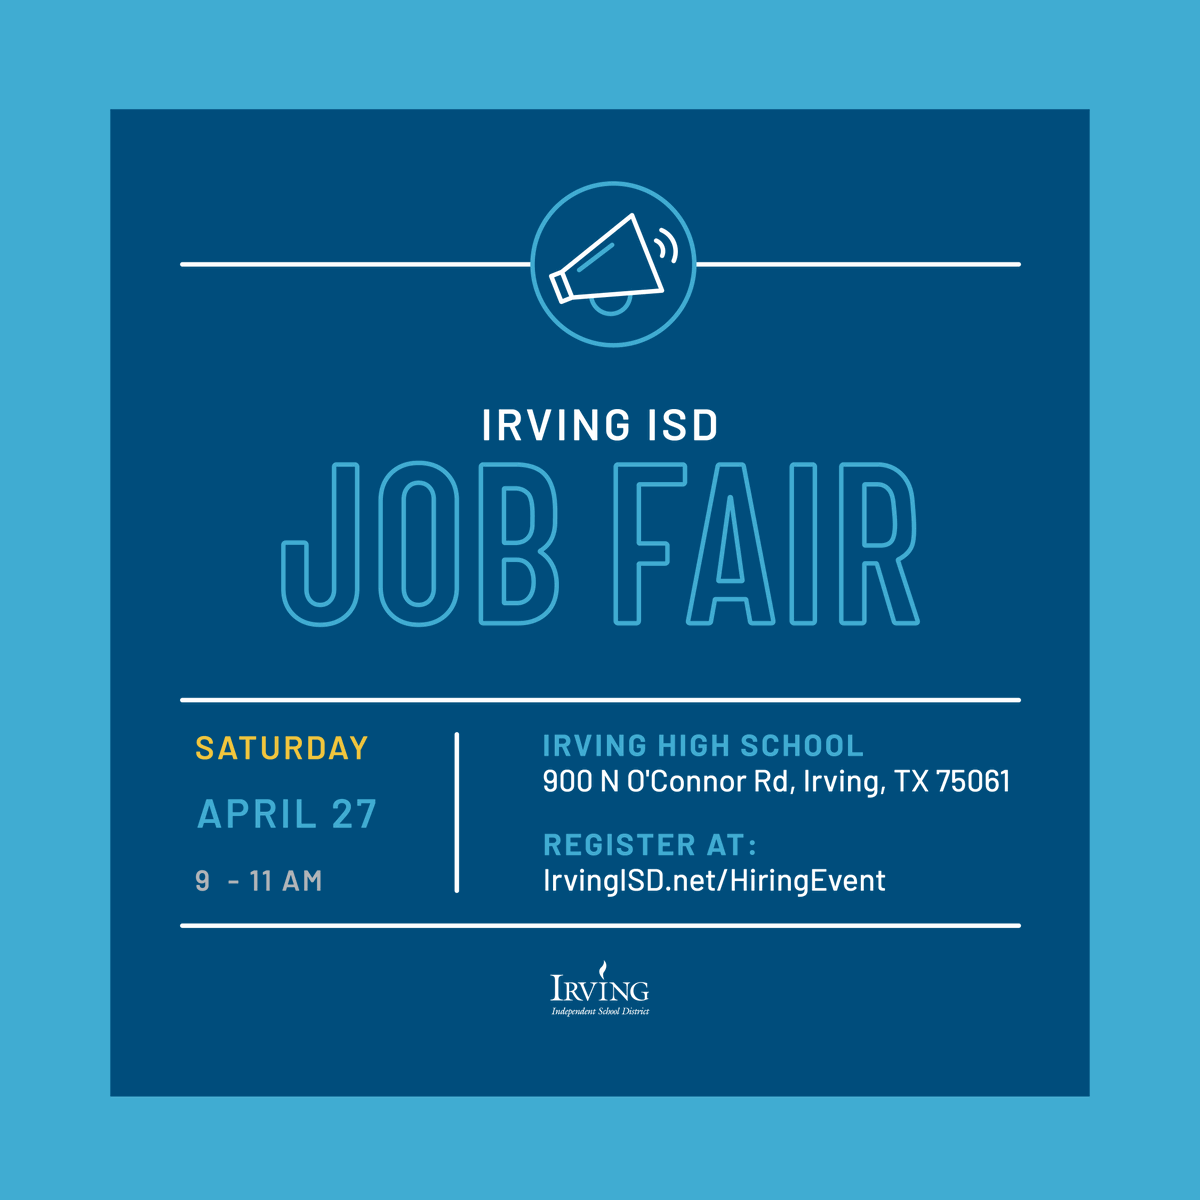 ‼️ONE WEEK AWAY‼️ Get ready for the Irving ISD job fair: 📆Saturday, April 27 ⏰9 to 11 AM 📍@IrvingHigh Register for the job fair today at IrvingISD.net/HiringEvent. We hope to see you soon! 👋